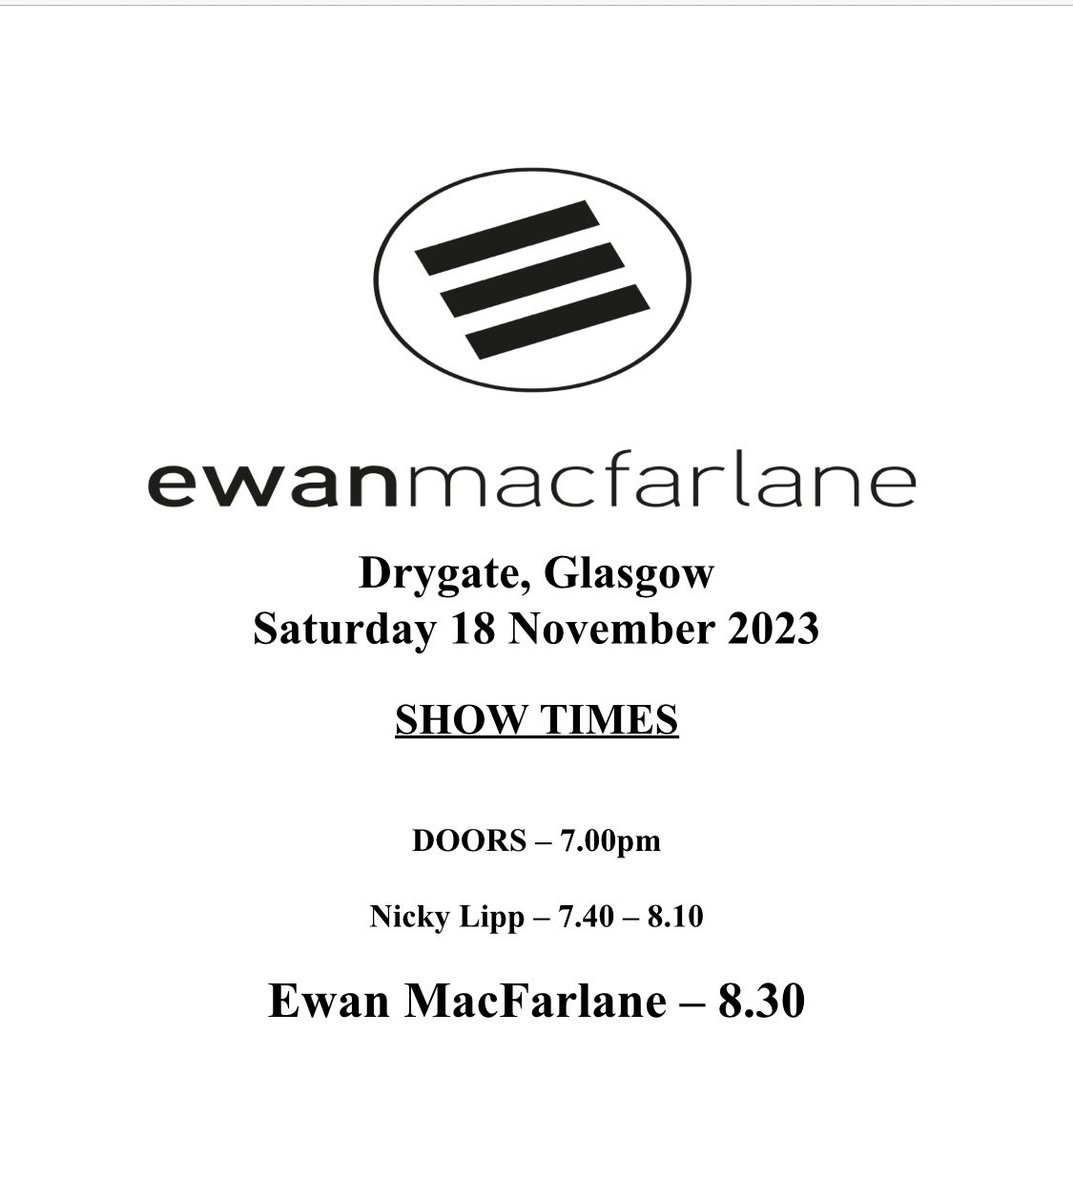 TONIGHT we’ll be taking over Glasgow - limited tickets left grab them before they’re gone don’t miss out 🔥💯 ticketmaster.co.uk/event/36005F17… @regularmusicuk @drygate @WhatsOnGlasgow @GlasgowMusicNet @Glasgow_Live